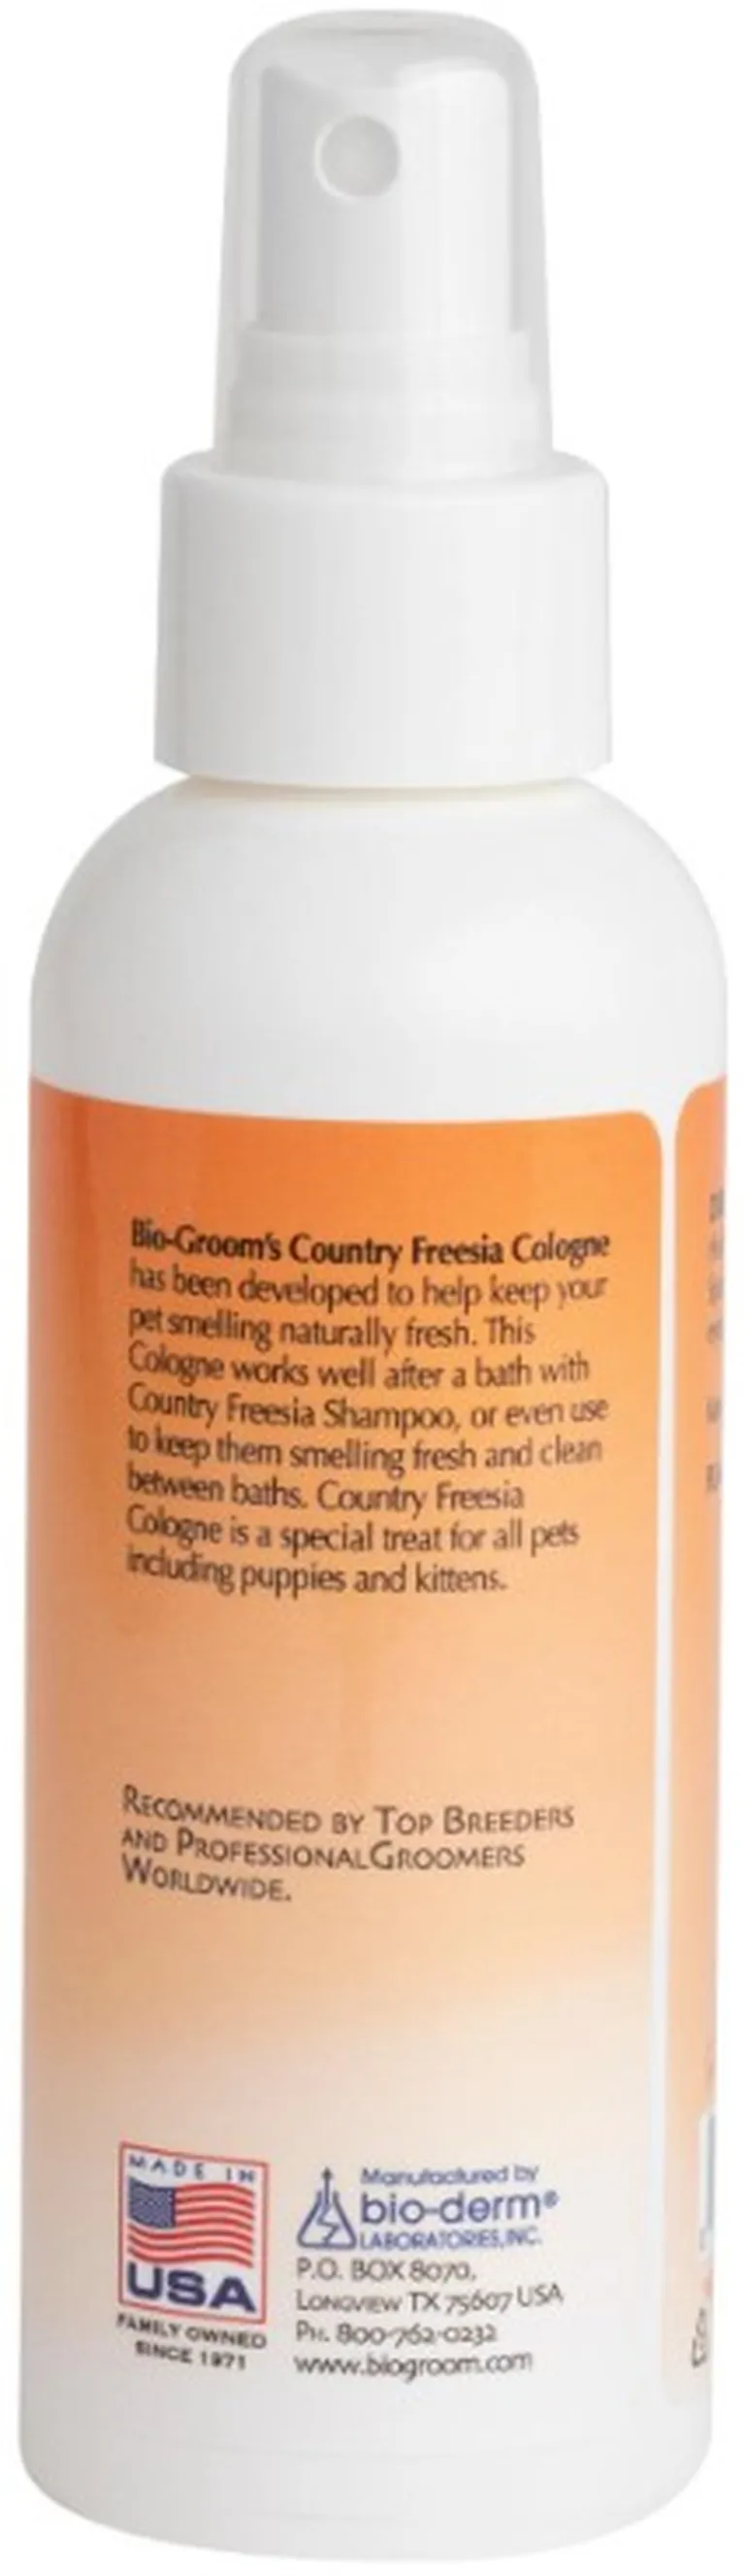 Bio Groom Natural Scents Country Freesia Cologne Photo 2